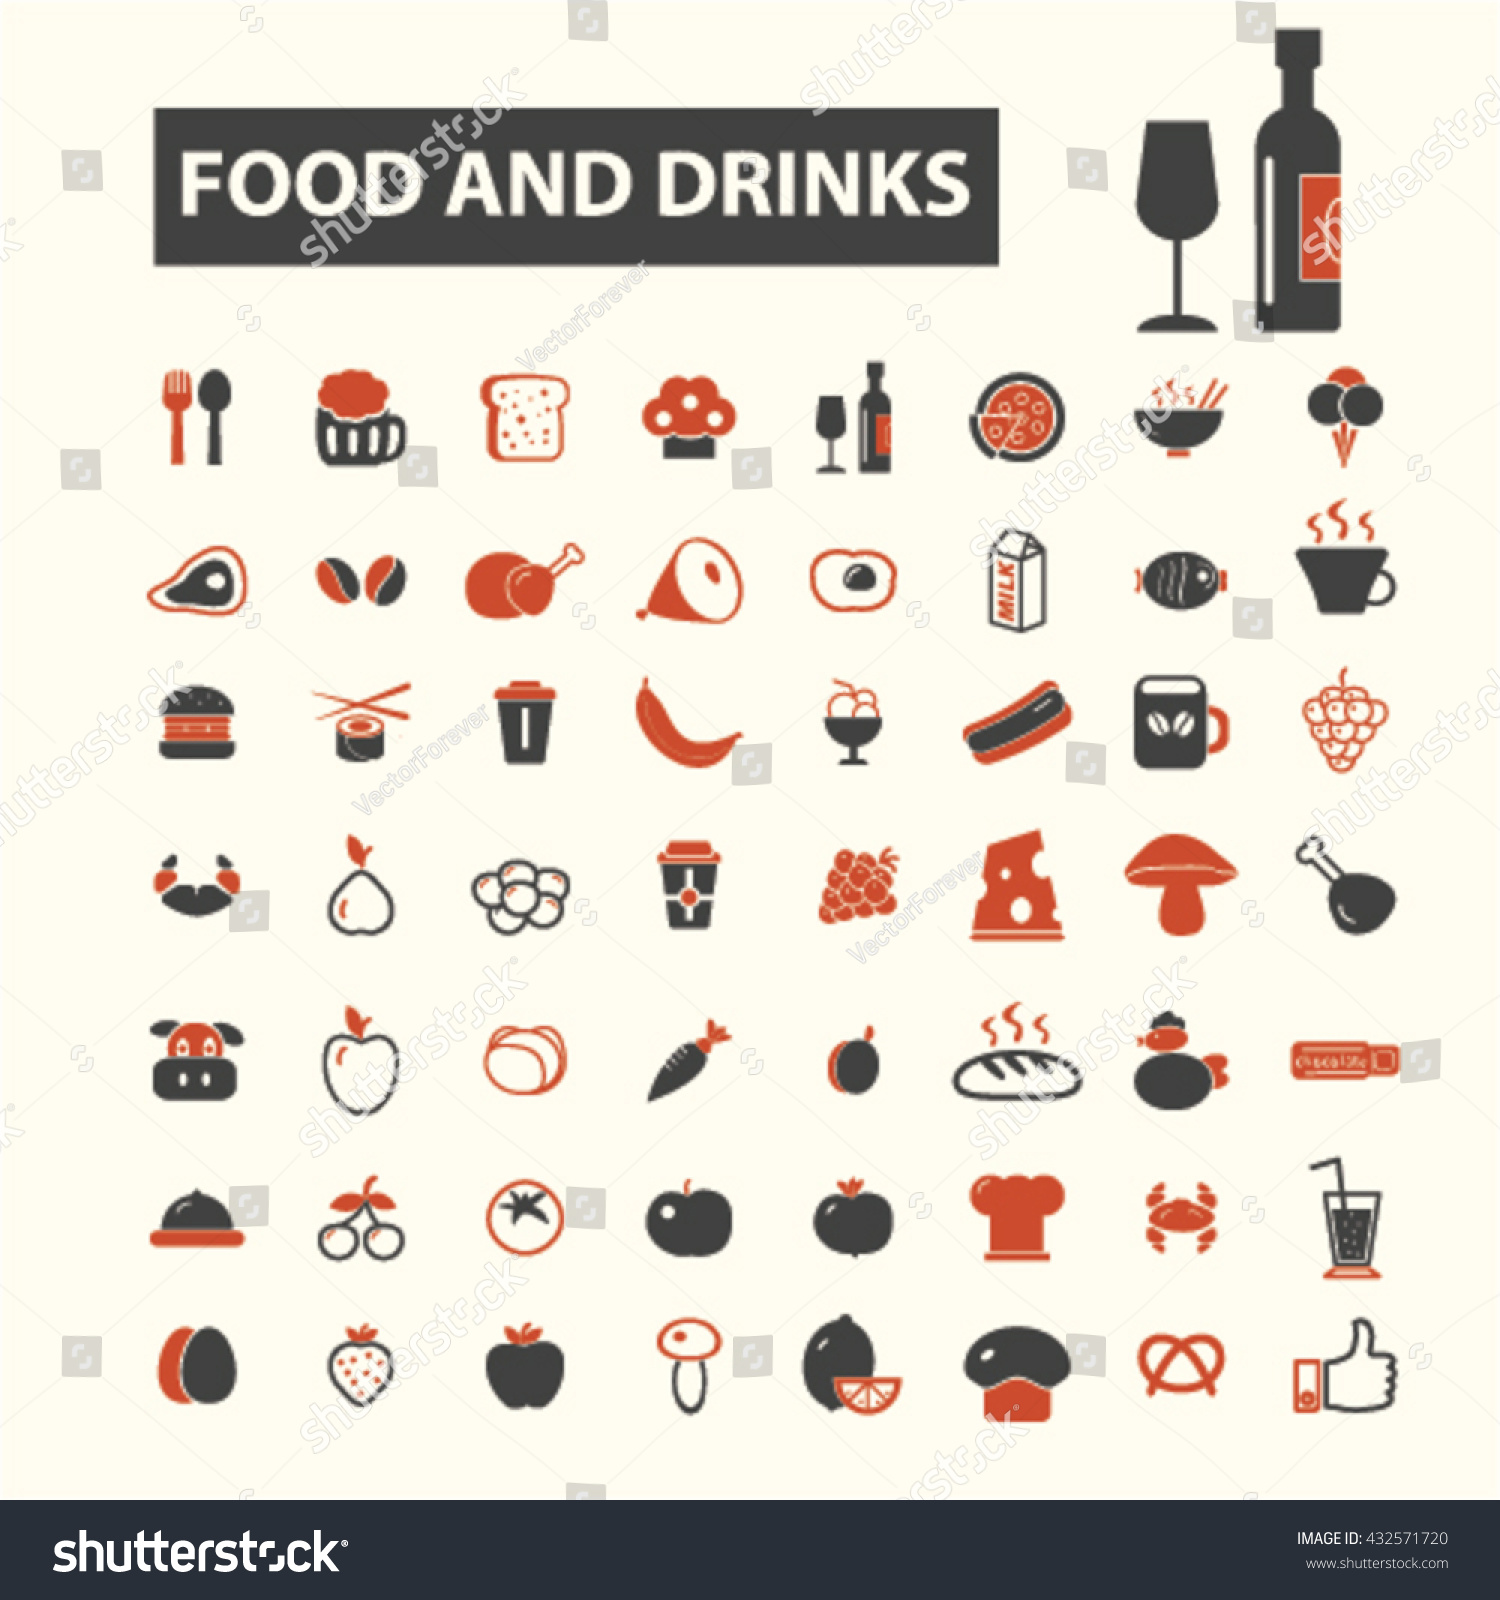 Food And Drinks Icons Stock Vector Illustration 432571720 : Shutterstock